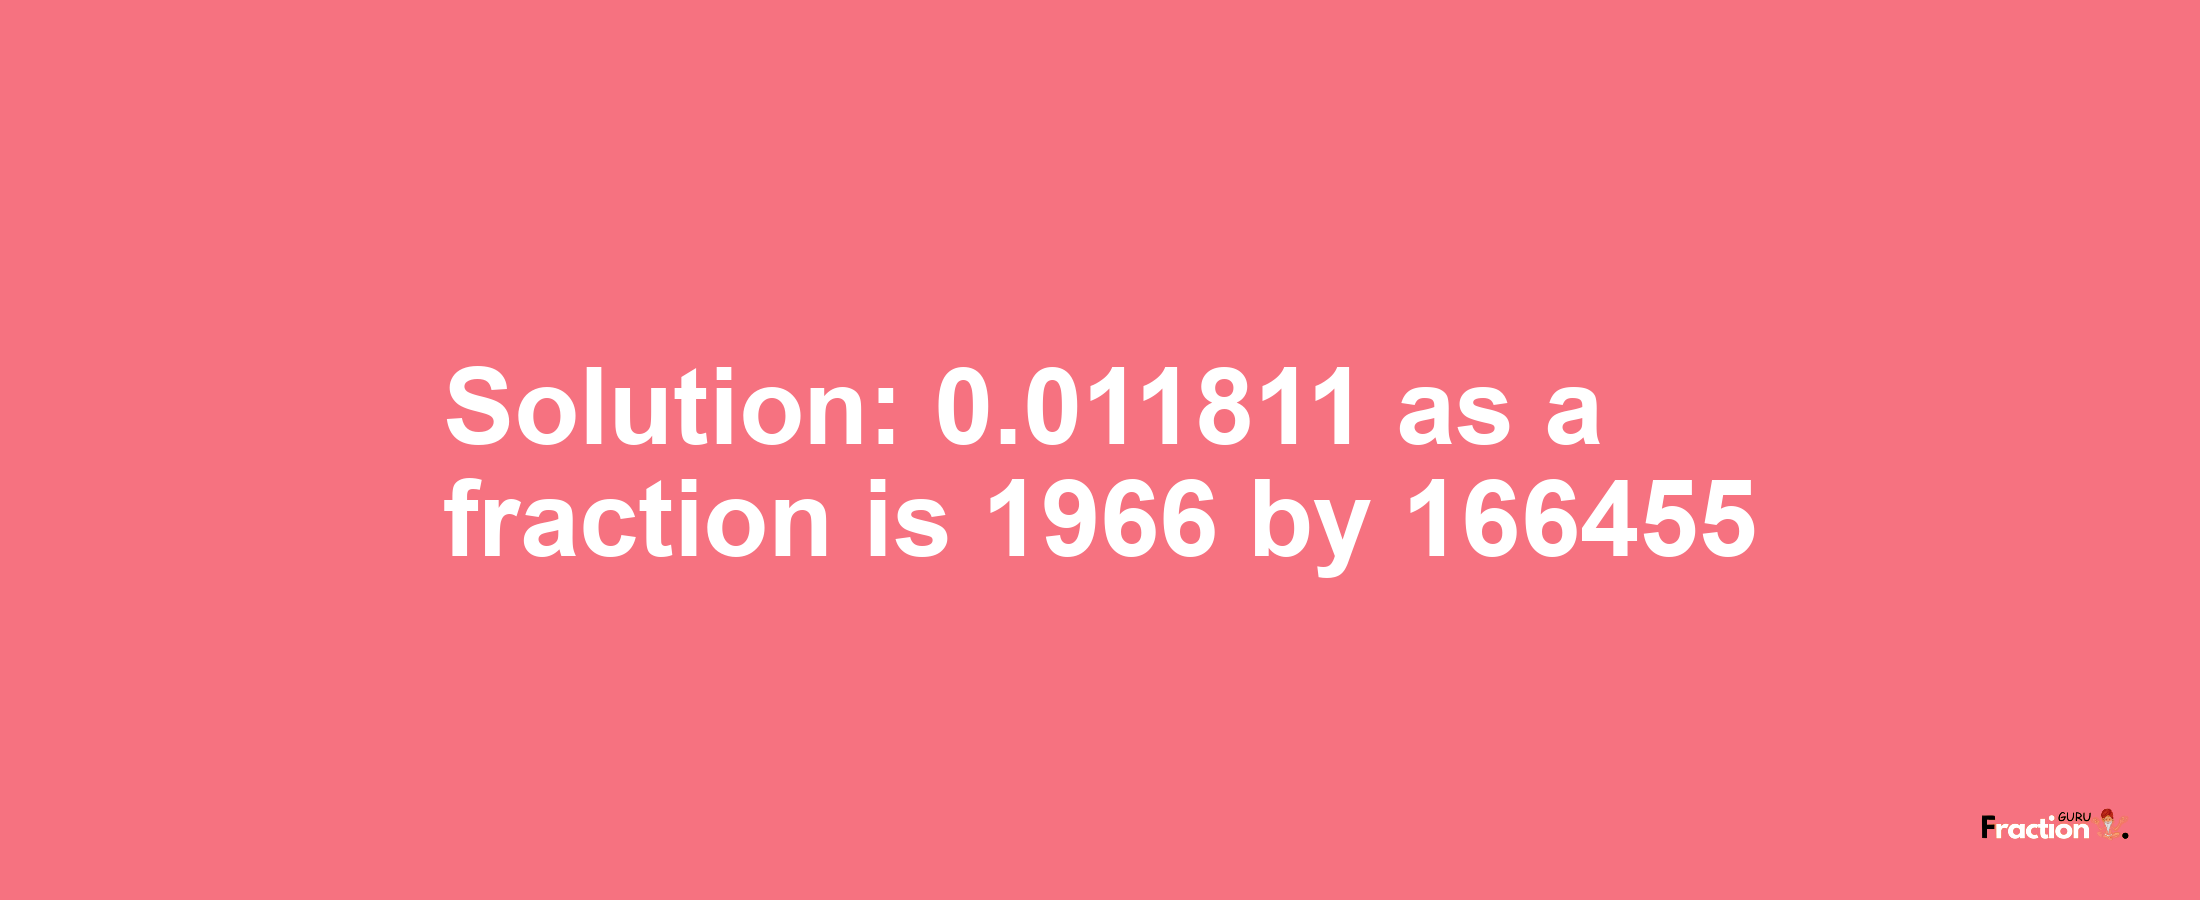 Solution:0.011811 as a fraction is 1966/166455